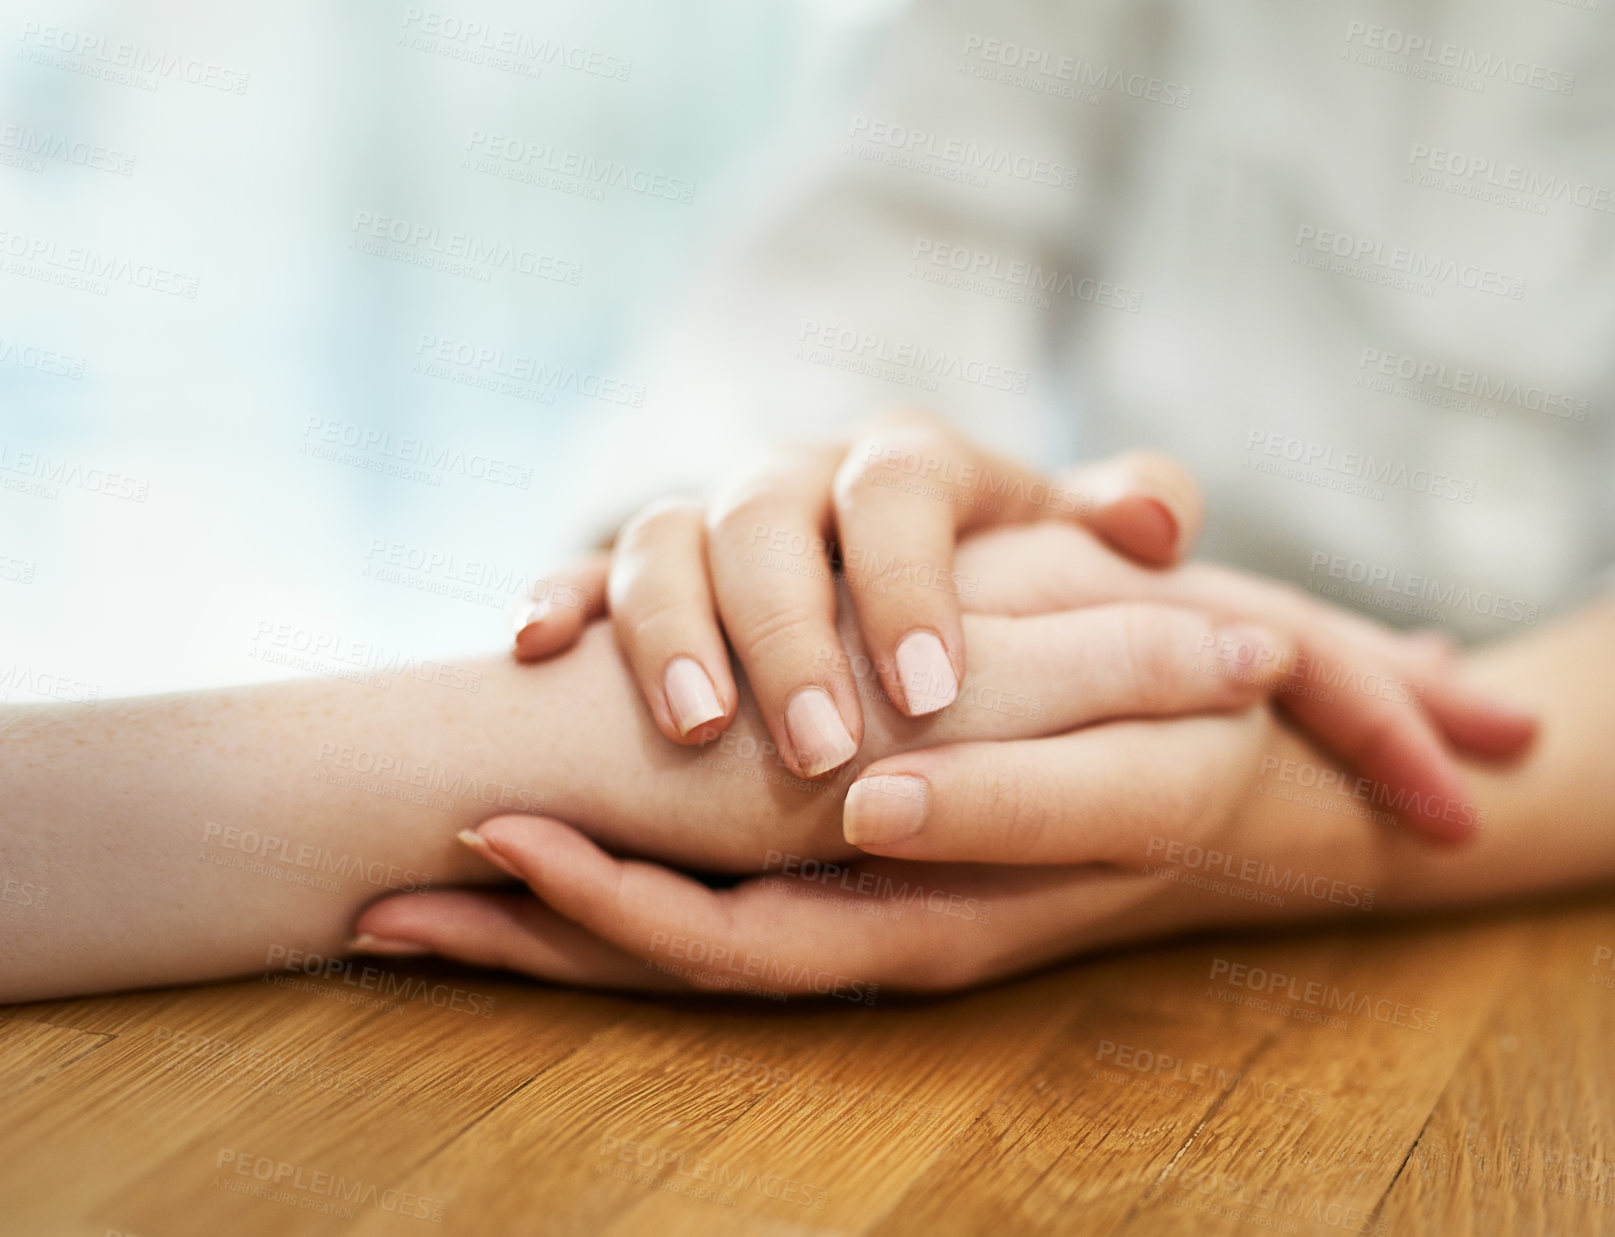 Buy stock photo Shot of two people holding hands in comfort